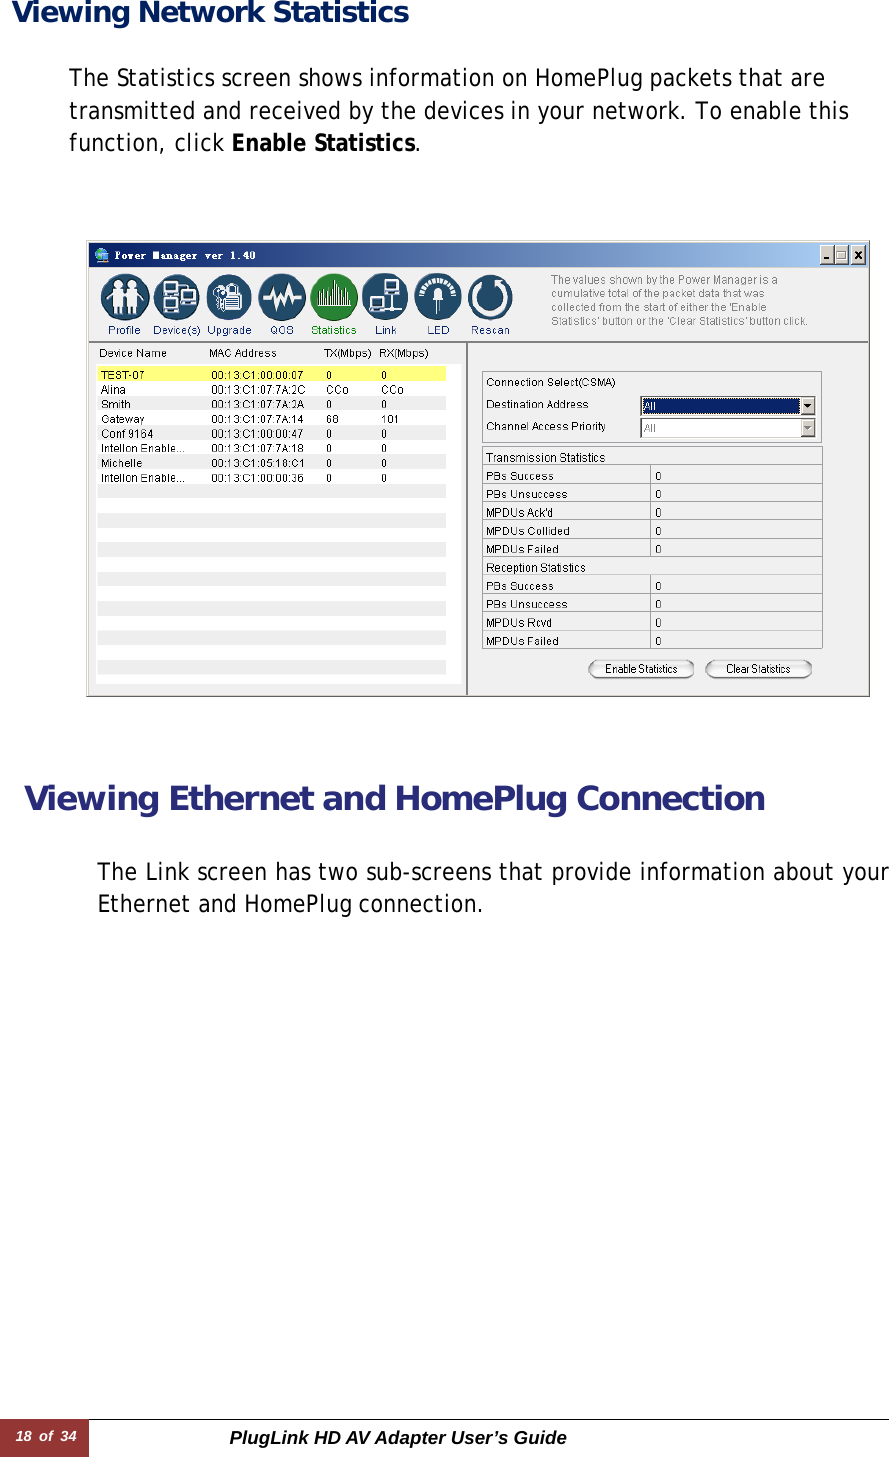 18 of 34  PlugLink HD AV Adapter User’s Guide Viewing Network Statistics          The Statistics screen shows information on HomePlug packets that are transmitted and received by the devices in your network. To enable this function, click Enable Statistics.  Viewing Ethernet and HomePlug Connection   The Link screen has two sub-screens that provide information about yourEthernet and HomePlug connection.  